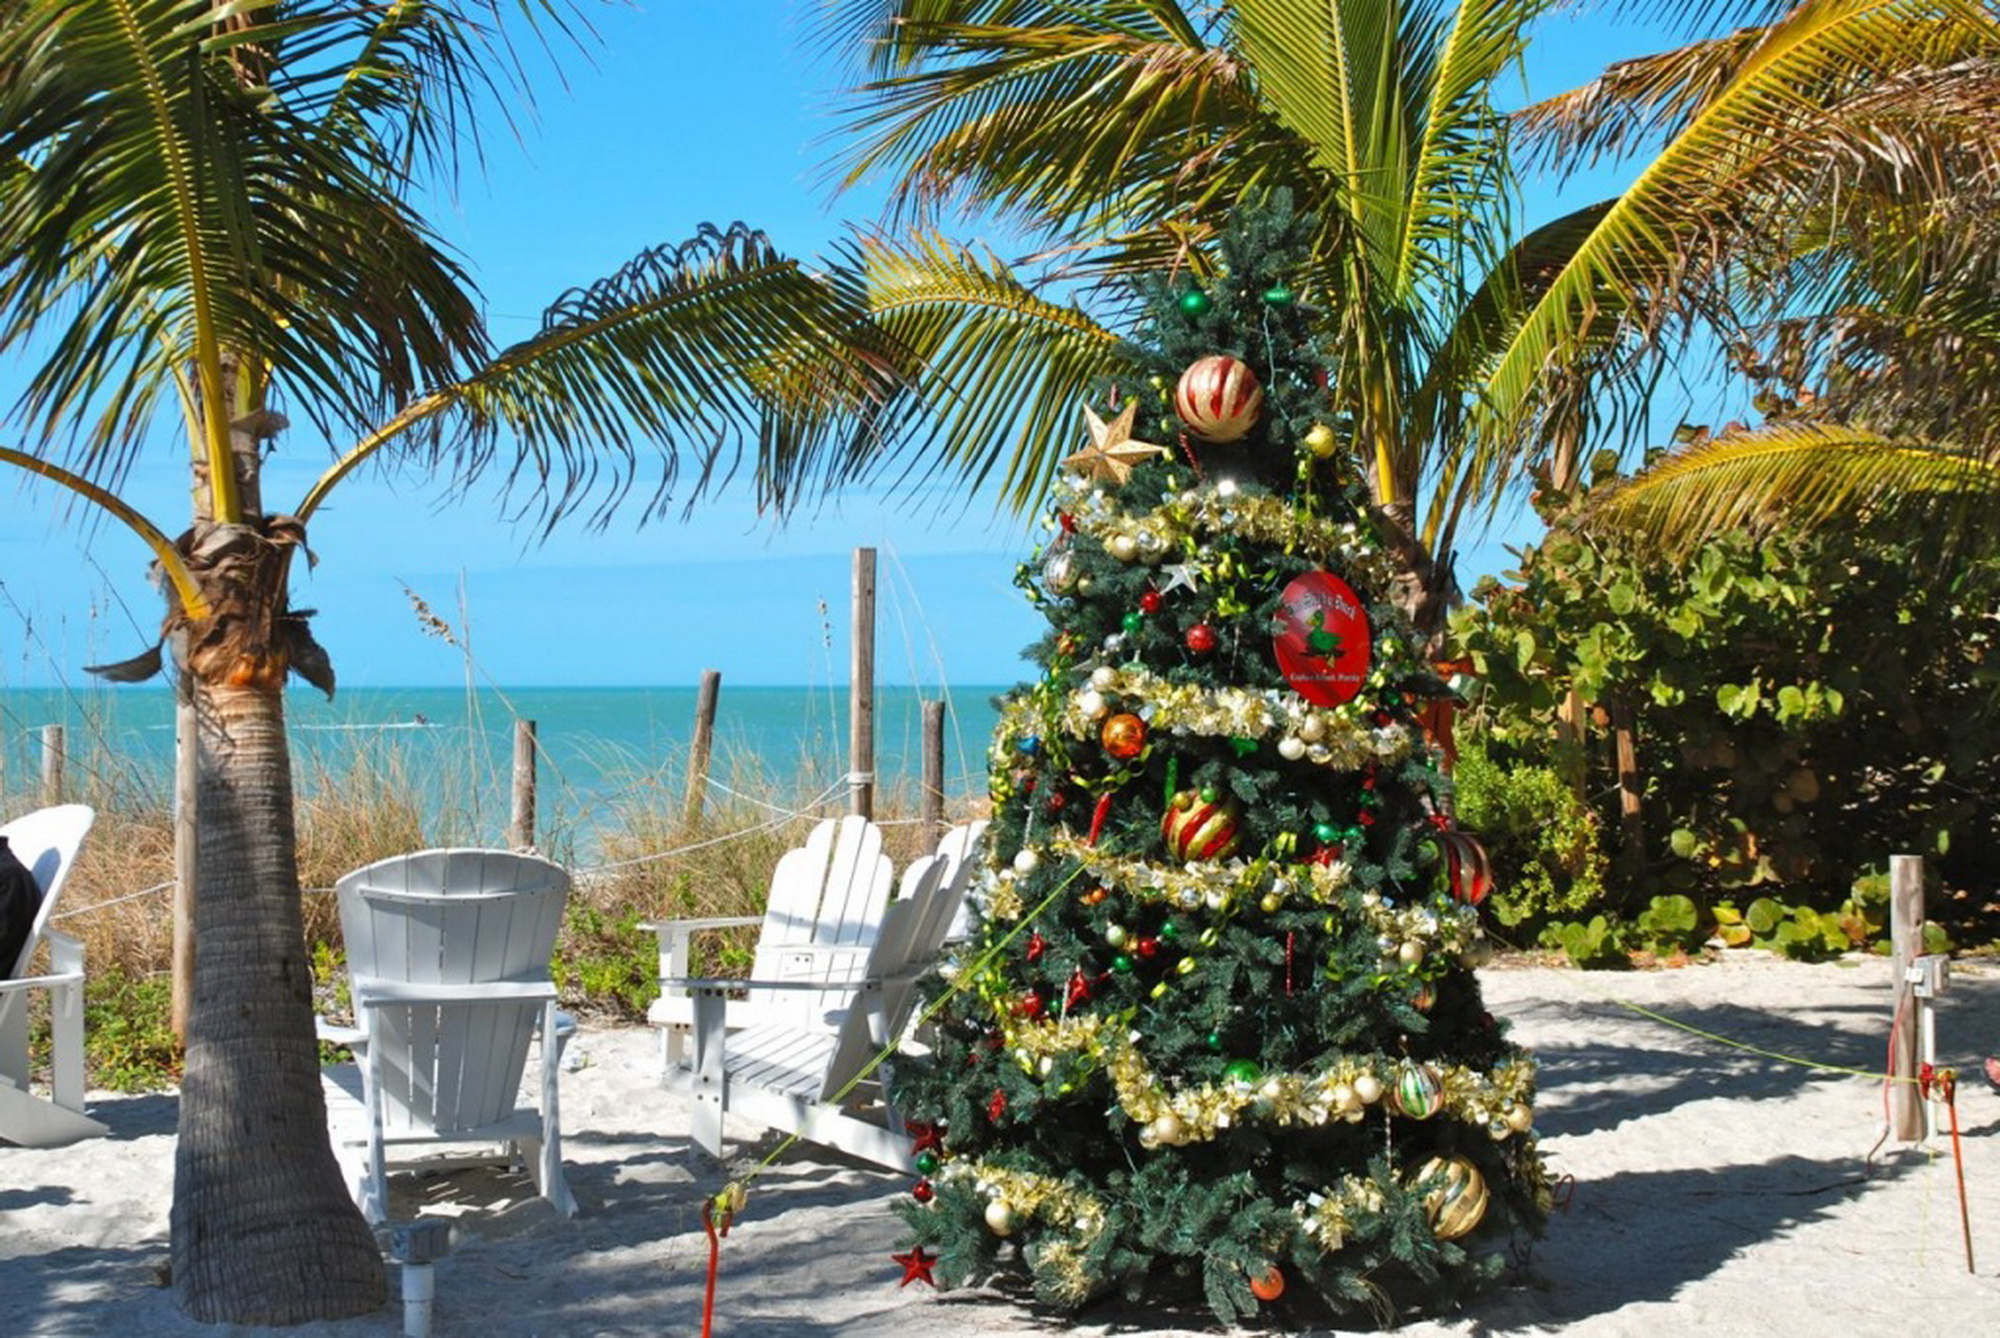 South Florida Vacation Rental Accommodations During The Holidays 4 Personal Injury South Florida Injury Law Firm